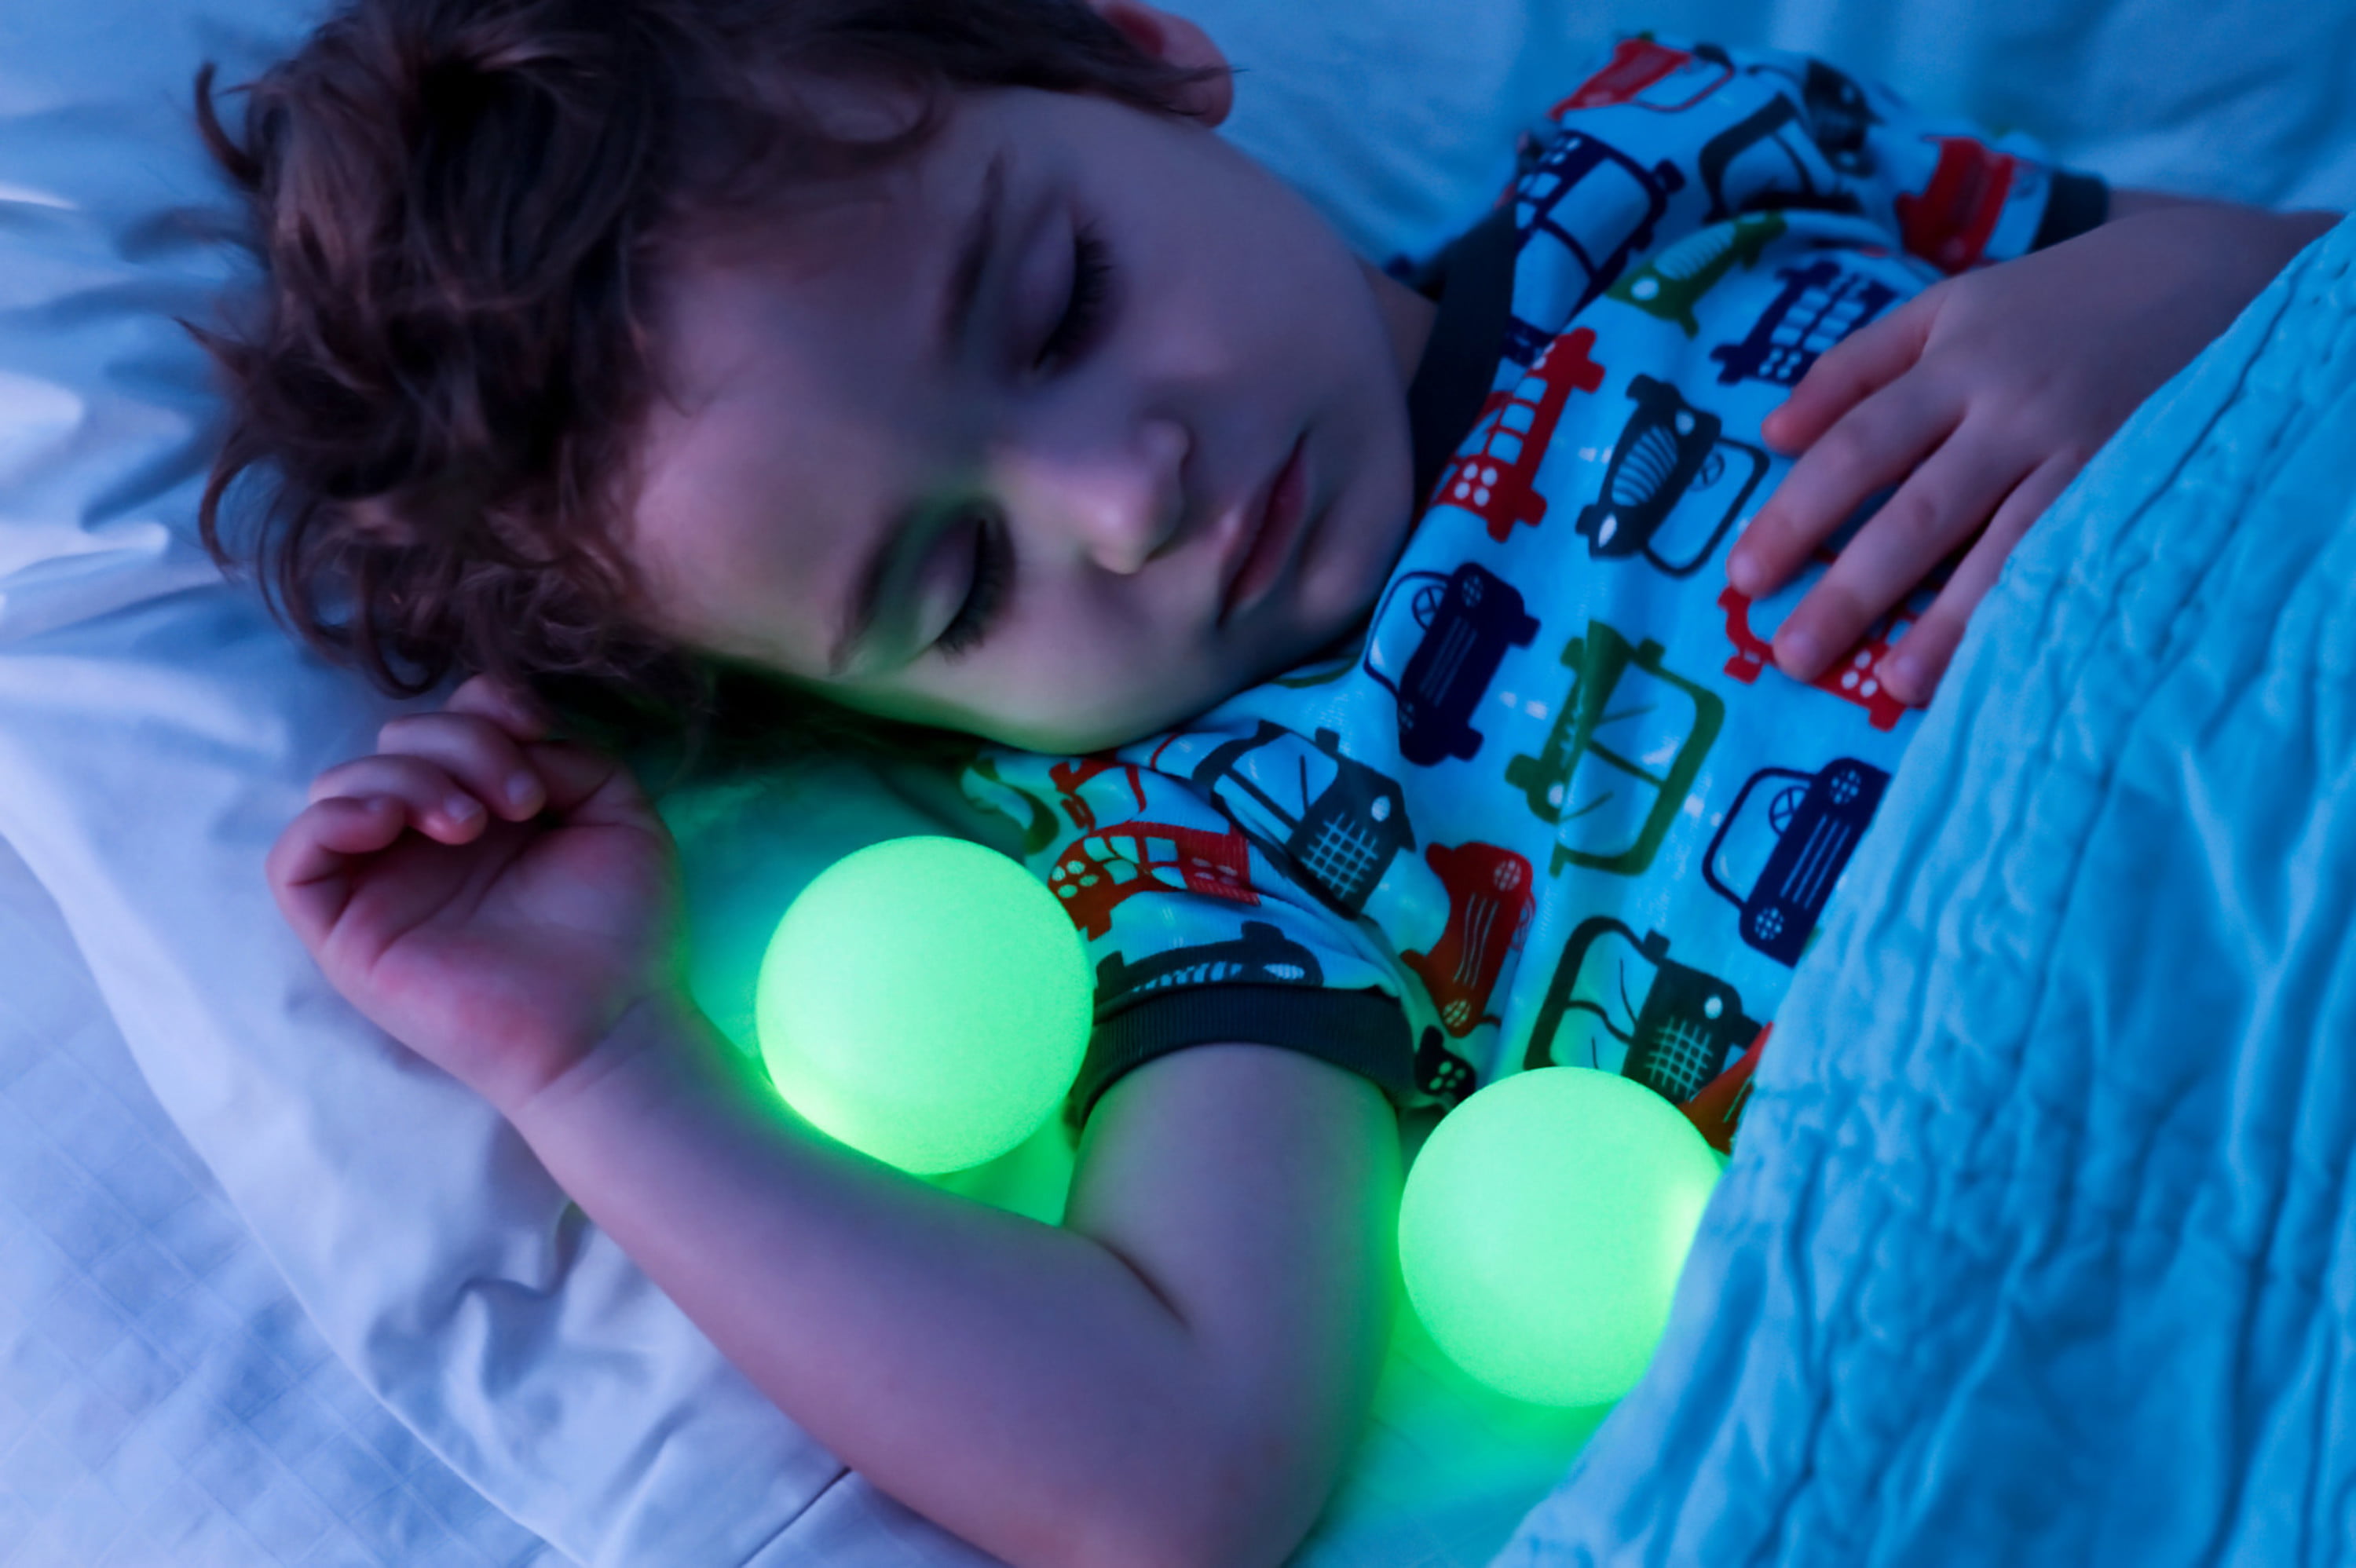 Boon GLO Multicolored Night Light For Kids With Stay-Cool Removable Glowing Balls, White -